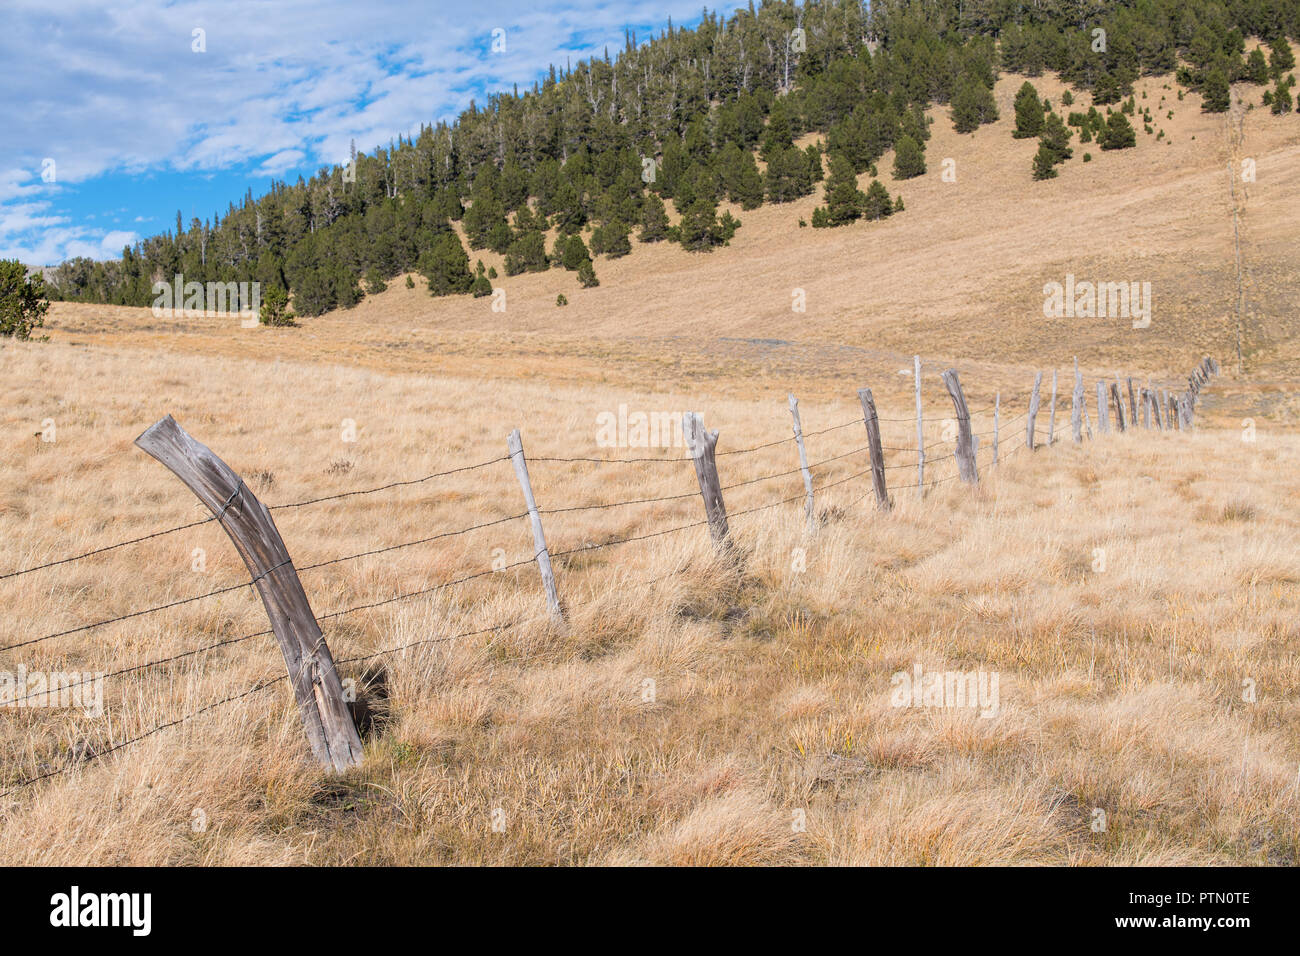 Rural landscape scene of a line of rustic, weathered fence posts and barbed wire crossing grassy fields on a ranch in northern New Mexico Stock Photo